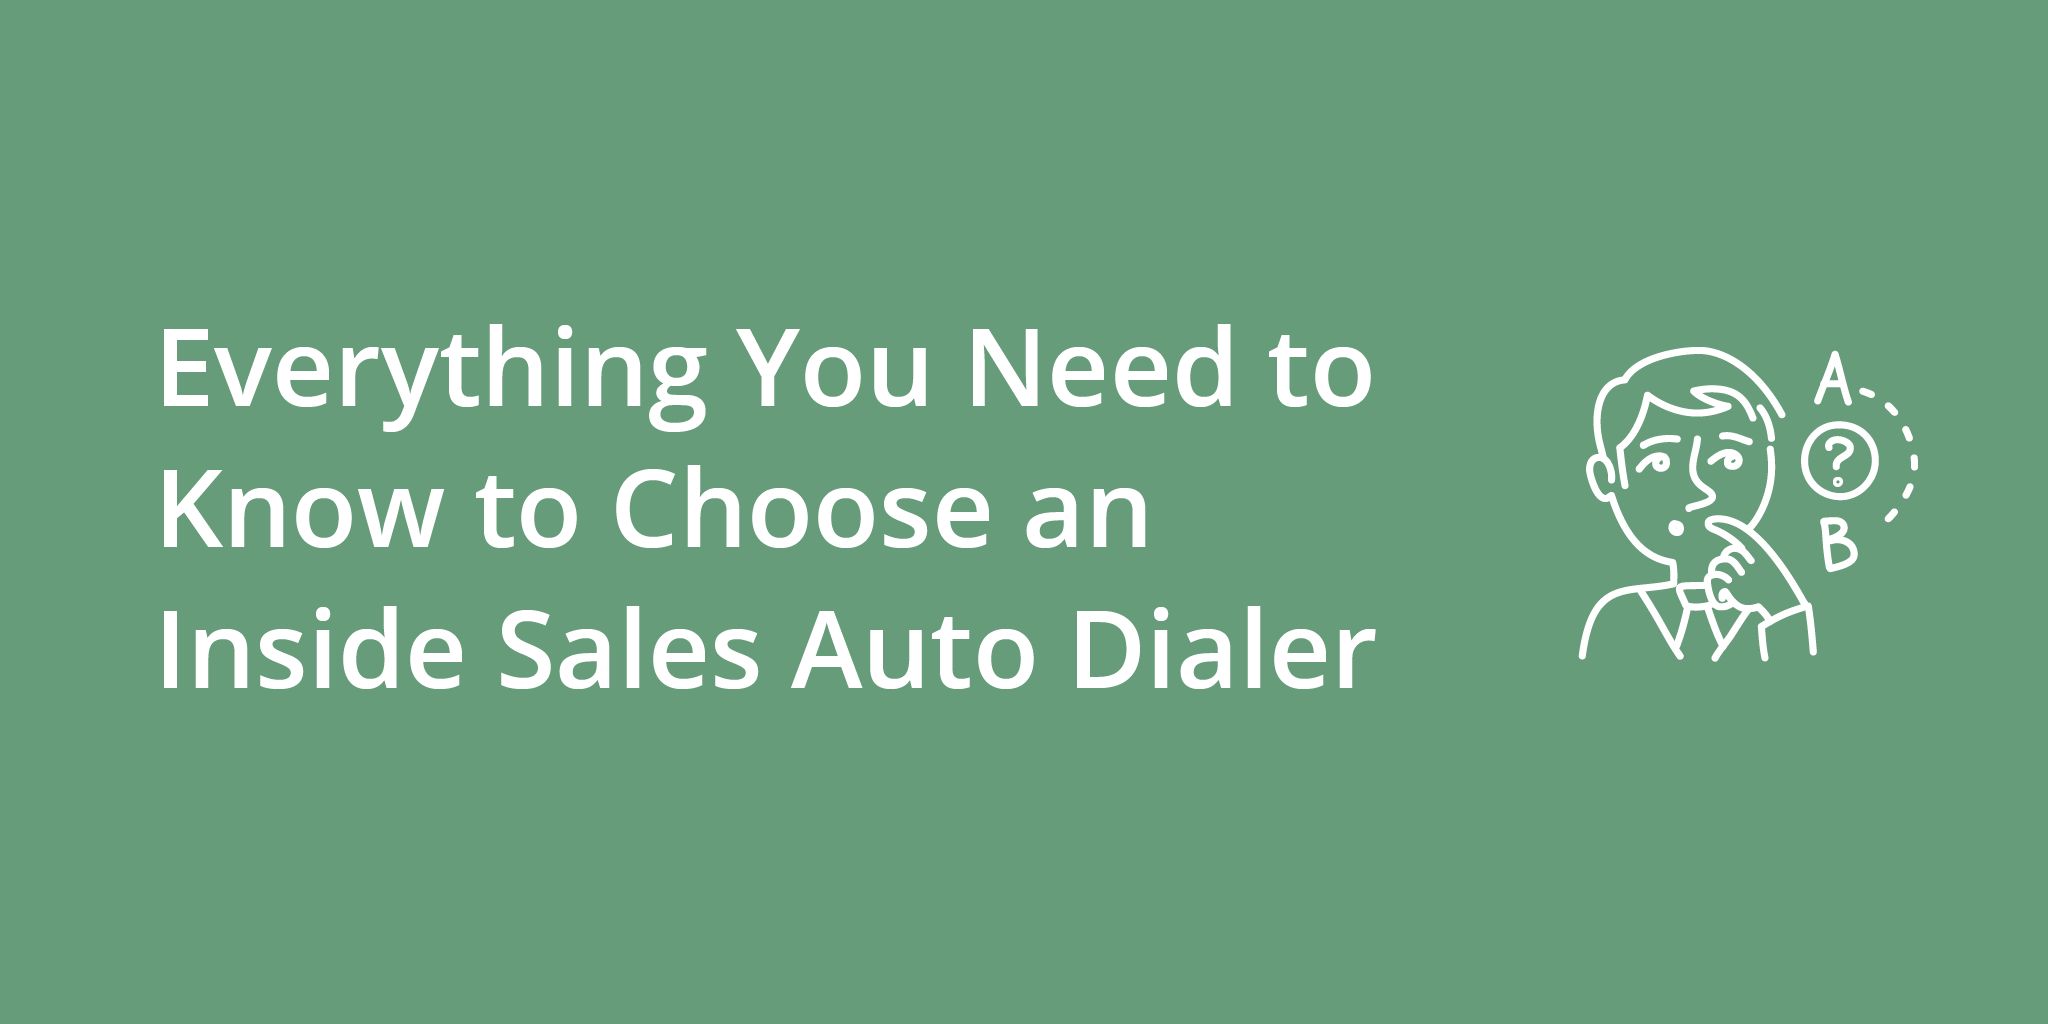 Everything You Need to Know to Choose an Inside Sales Auto Dialer | Telephones for business